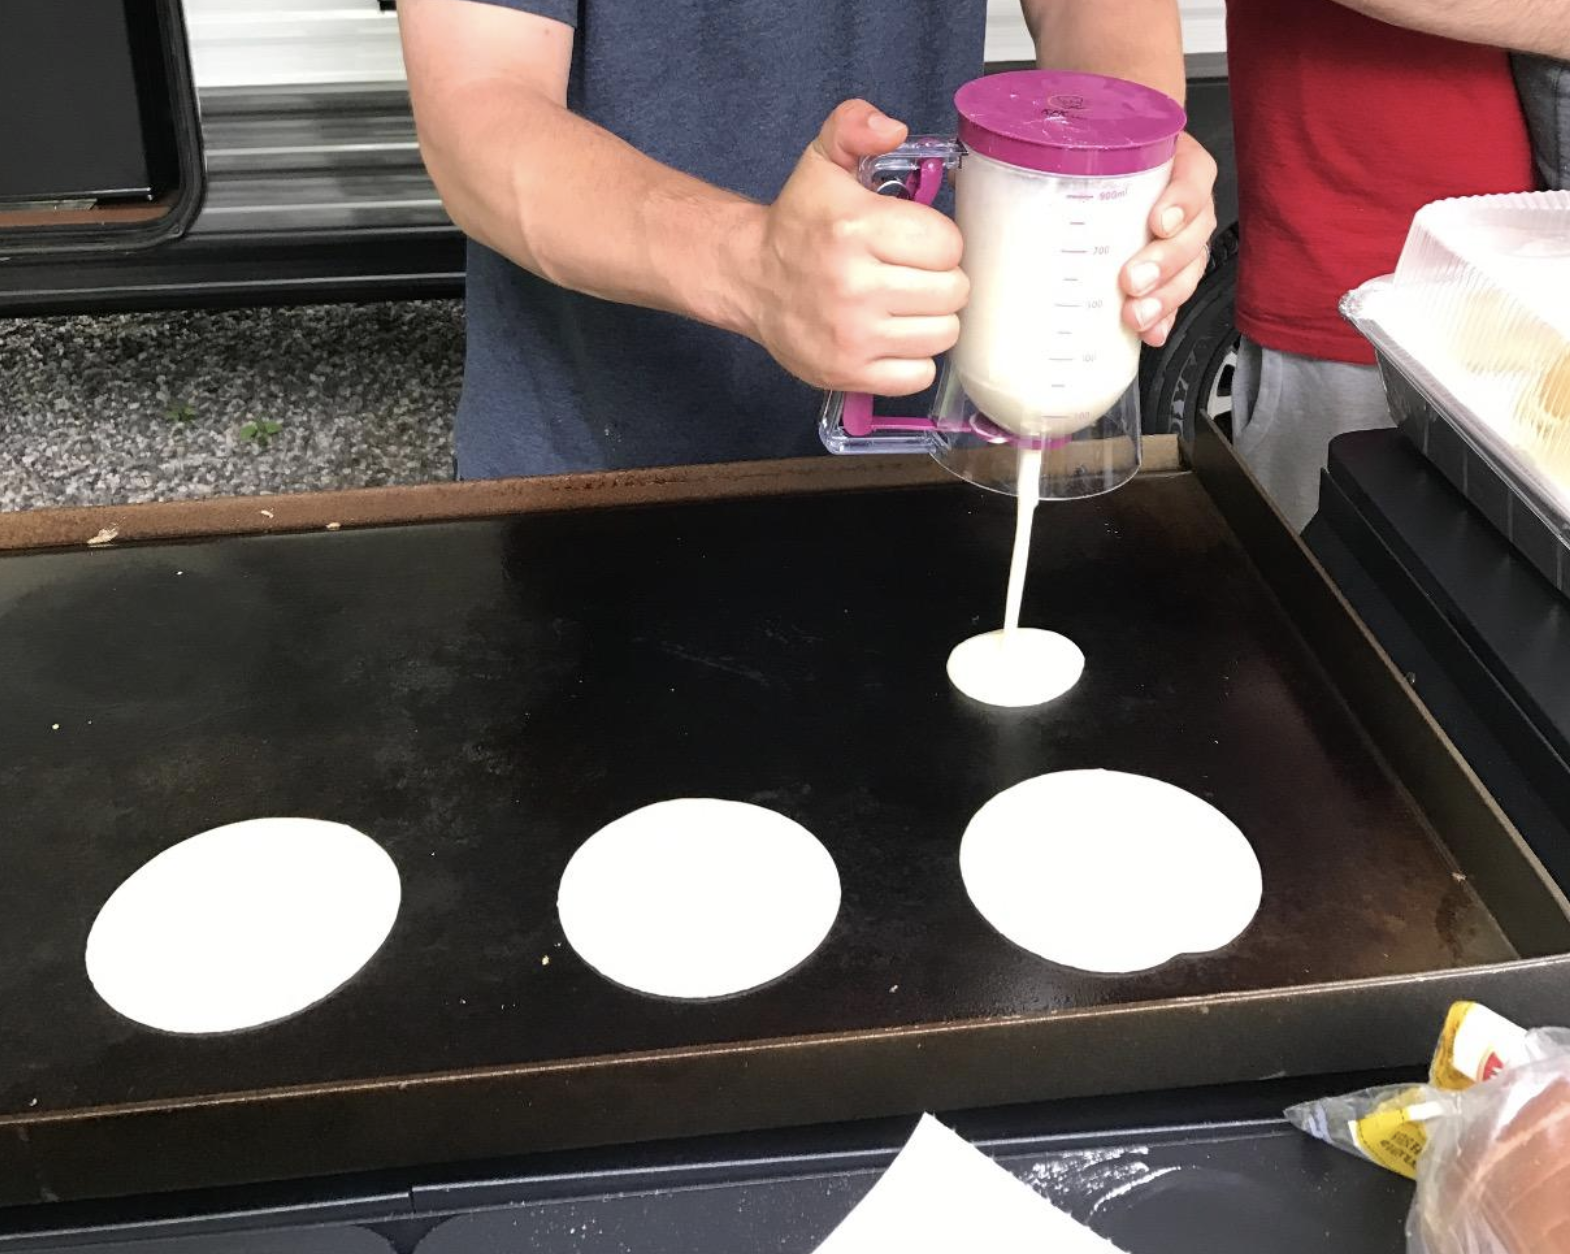 Model holding the circular batter dispenser and pouring out pancake batter on to a griddle